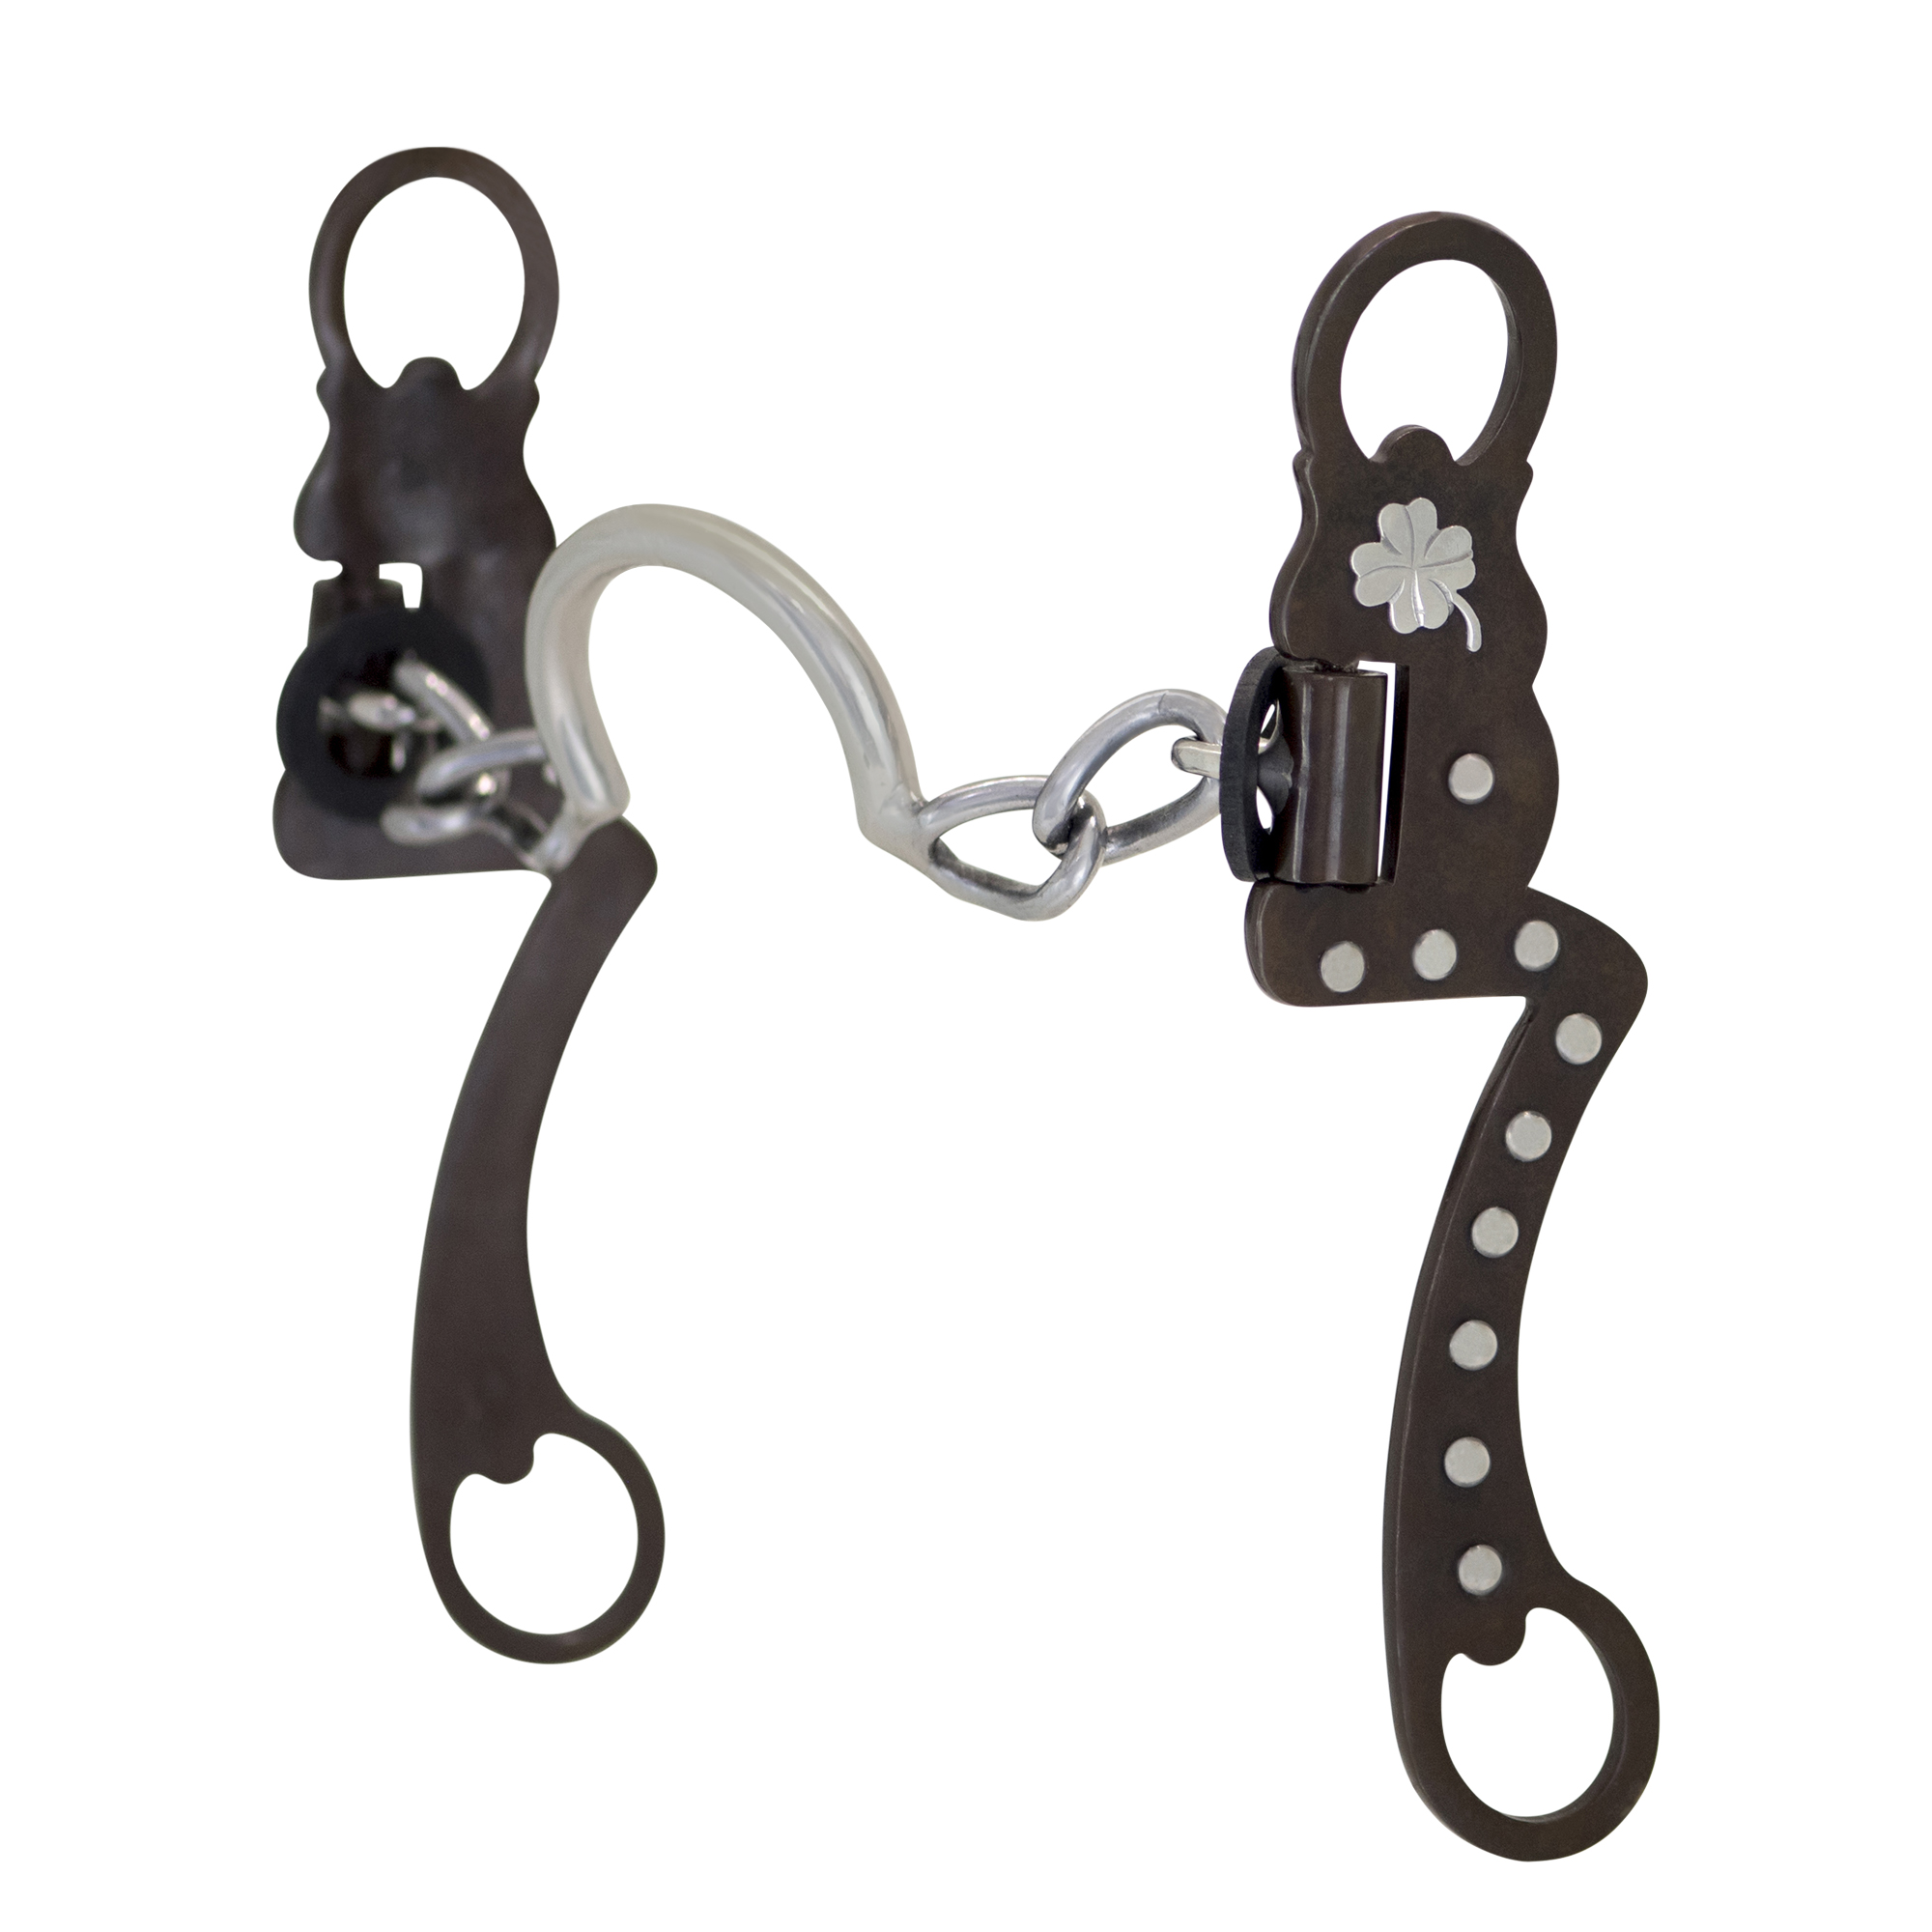 Partrade Equine Wall Saddle Rack 24In Black 